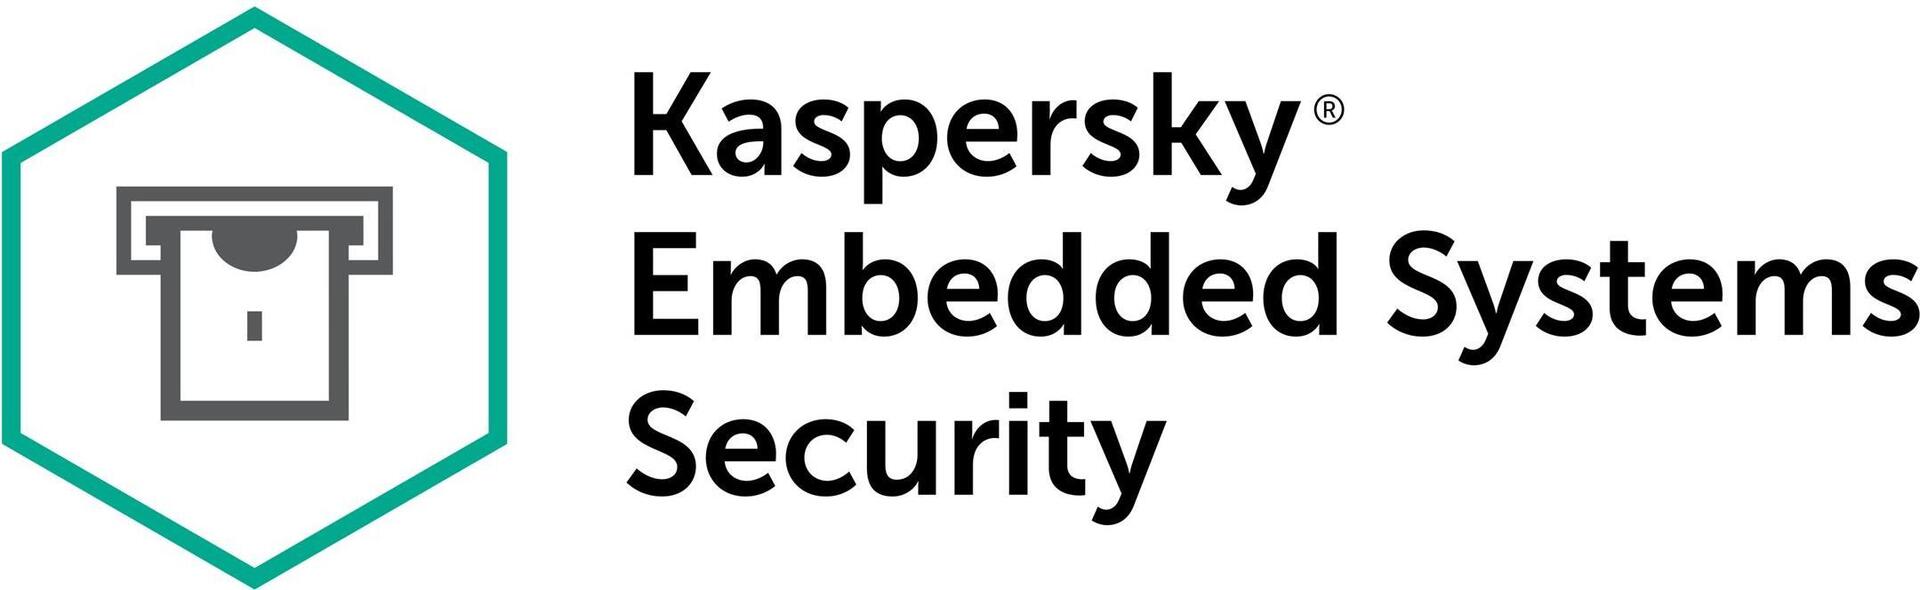 Kaspersky Embedded Systems Security (KL4891XAPTS)